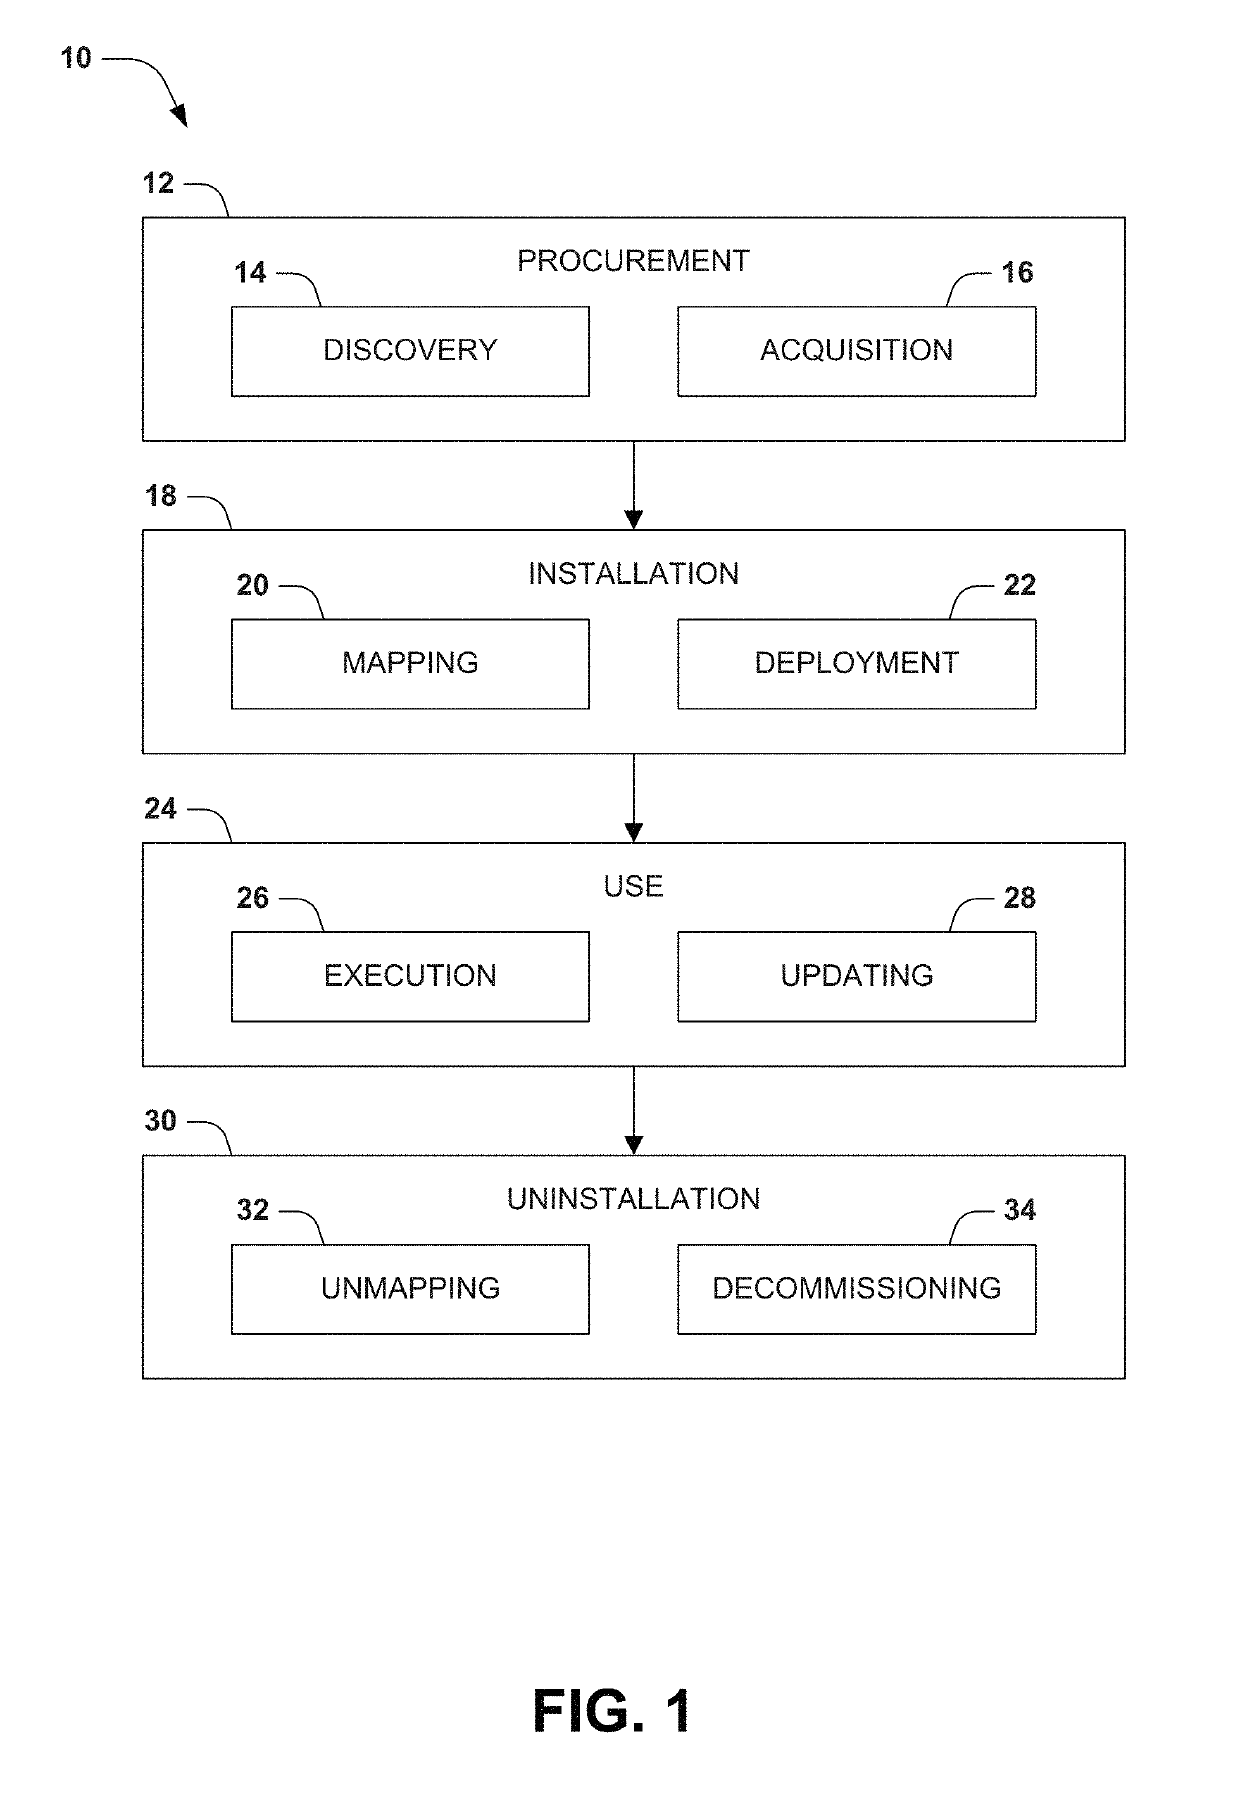 Application management within deployable object hierarchy